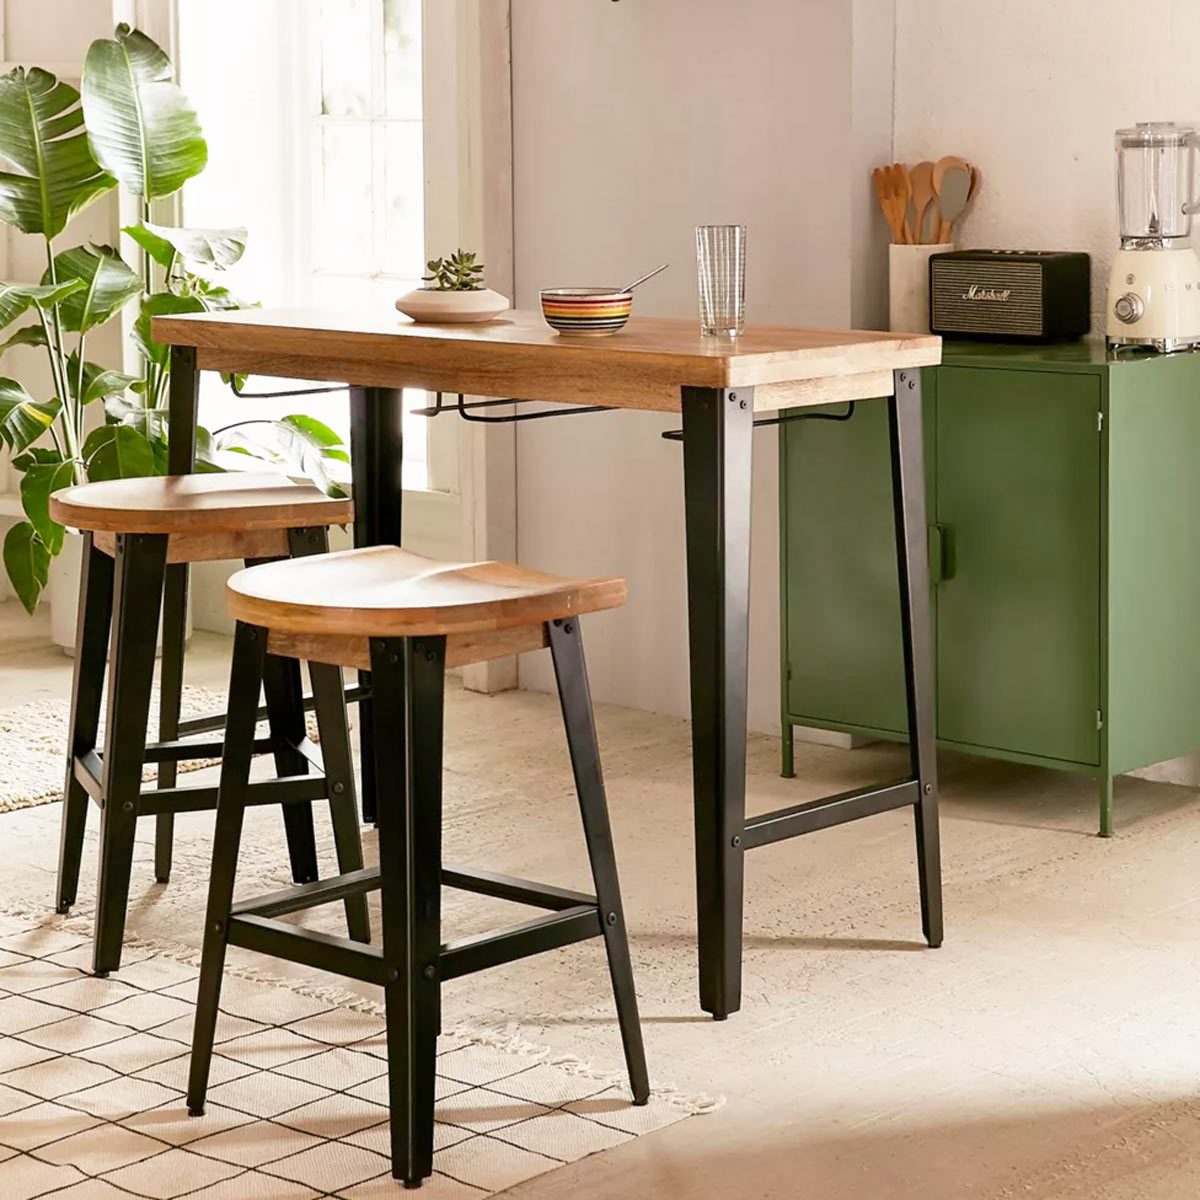 Best Kitchen and Dining Tables for Small Spaces